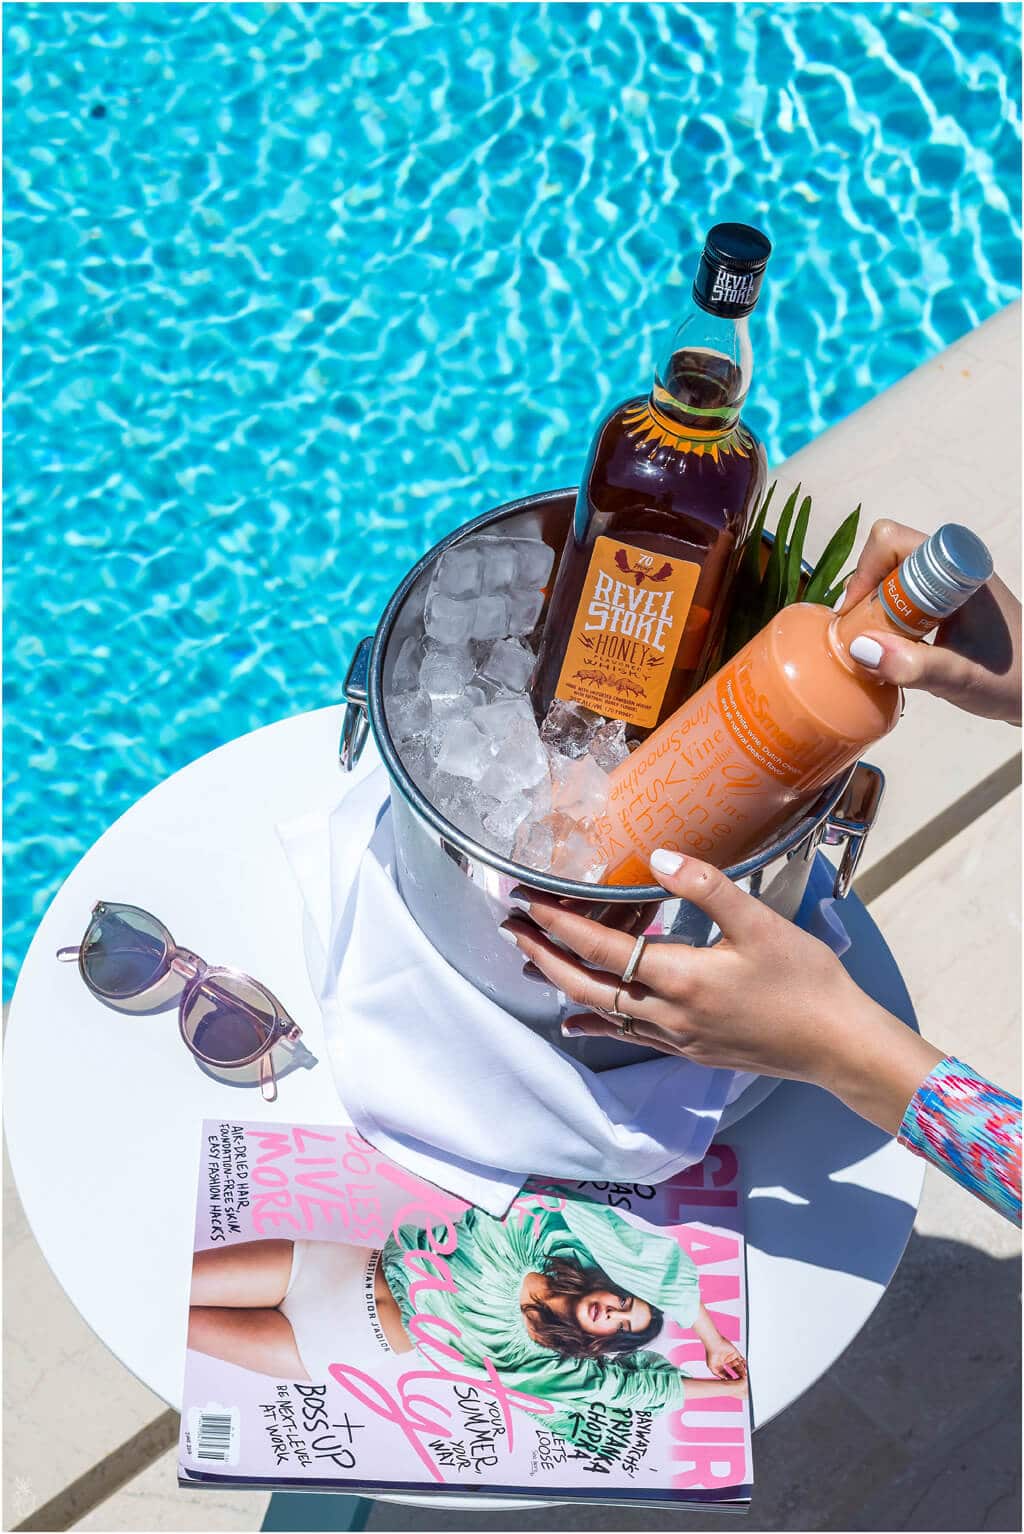 Cocktails By The Pool: Two easy recipes for summer cocktails - Honey Mint Whiskey Mojito & Vine Smoothies! Just pour, mix and sip at your next pool party!